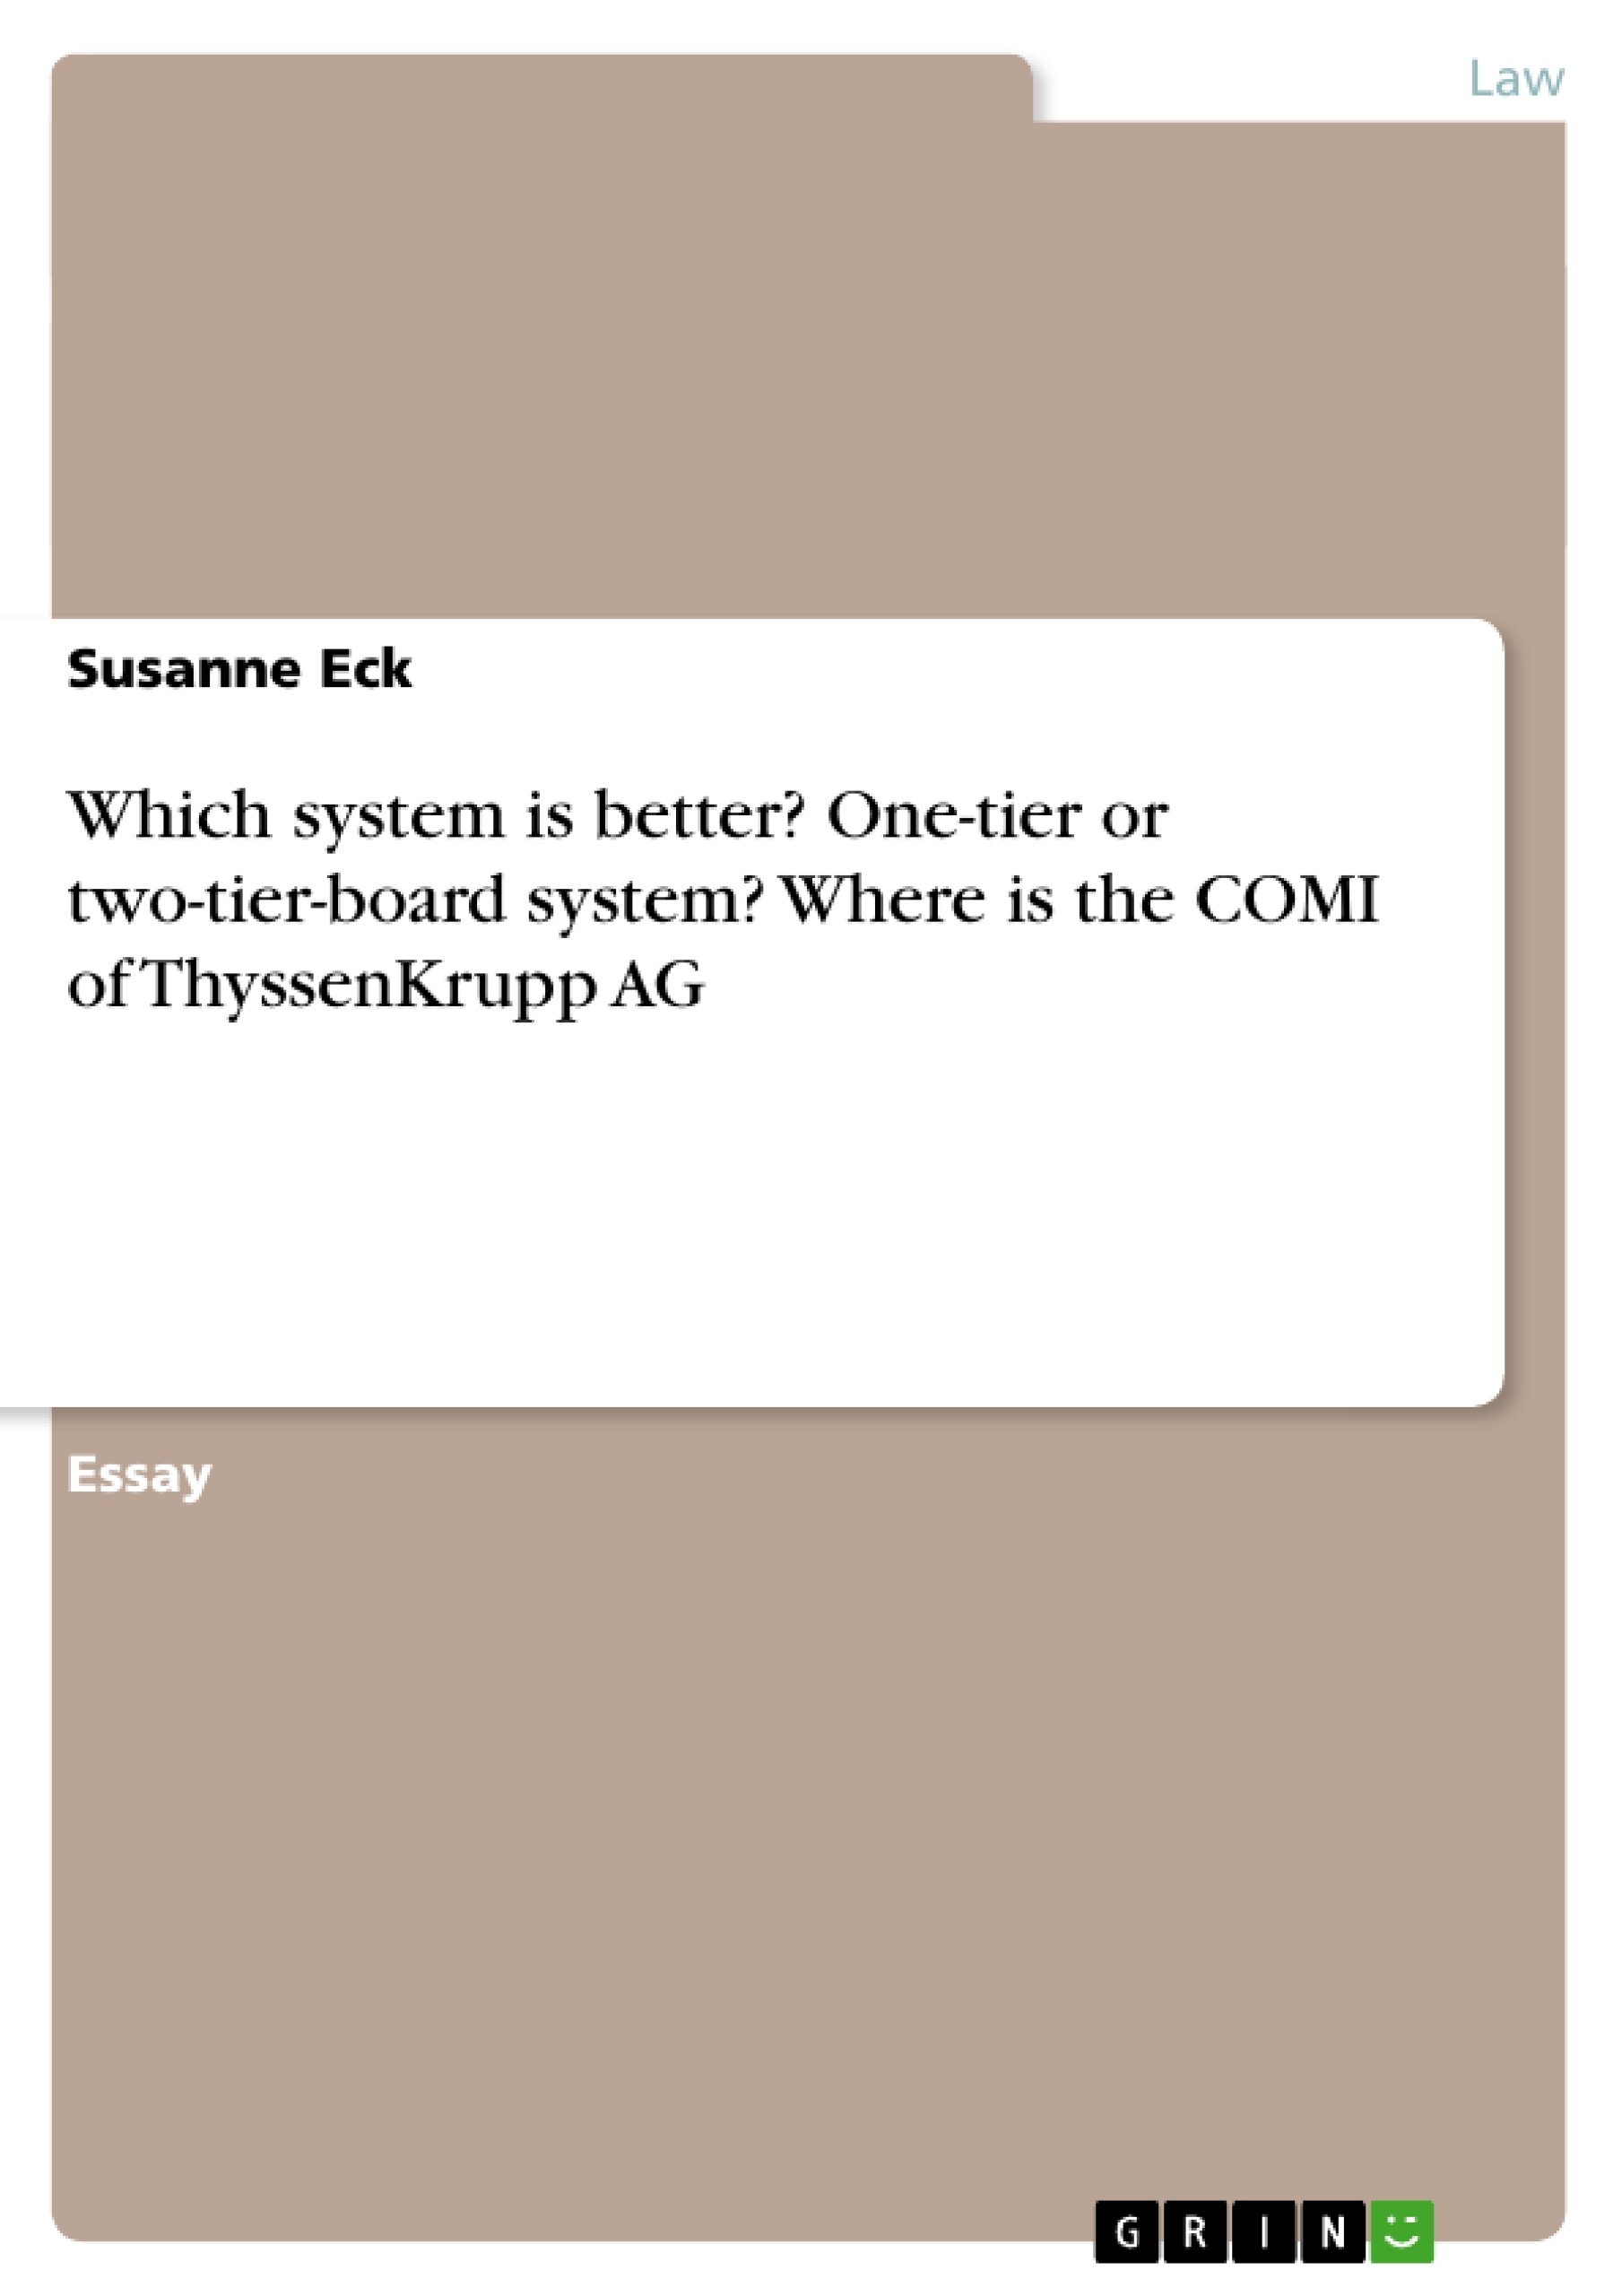 Title: Which system is better? One-tier or two-tier-board system? Where is the COMI of ThyssenKrupp AG